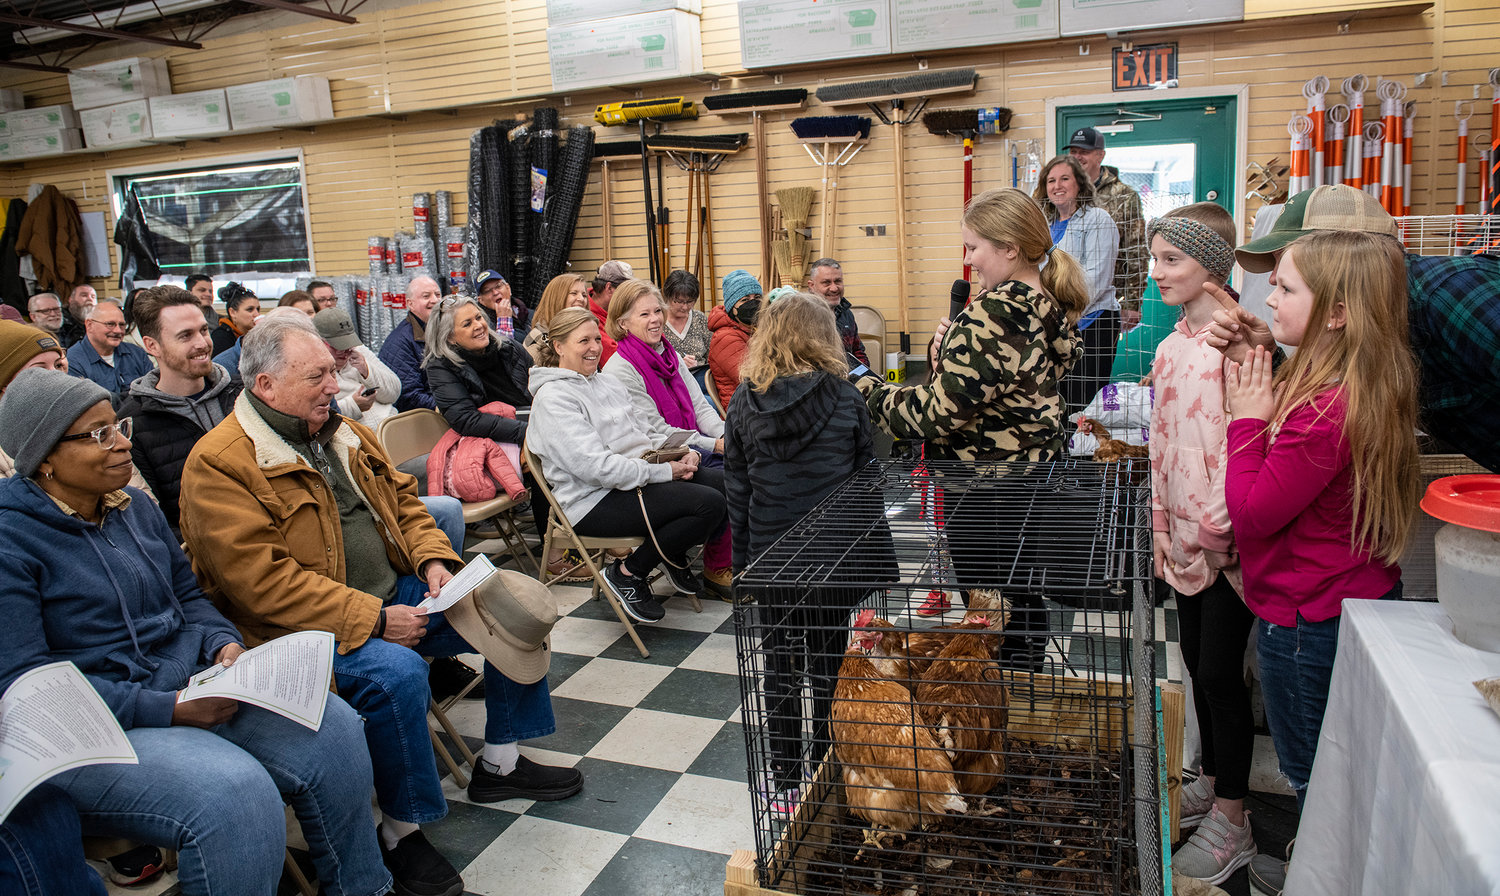 The Dodson and Brattin children started the how-to seminar by telling funny Cluck Cluck Cluck! jokes at Bell’s Seed Store.